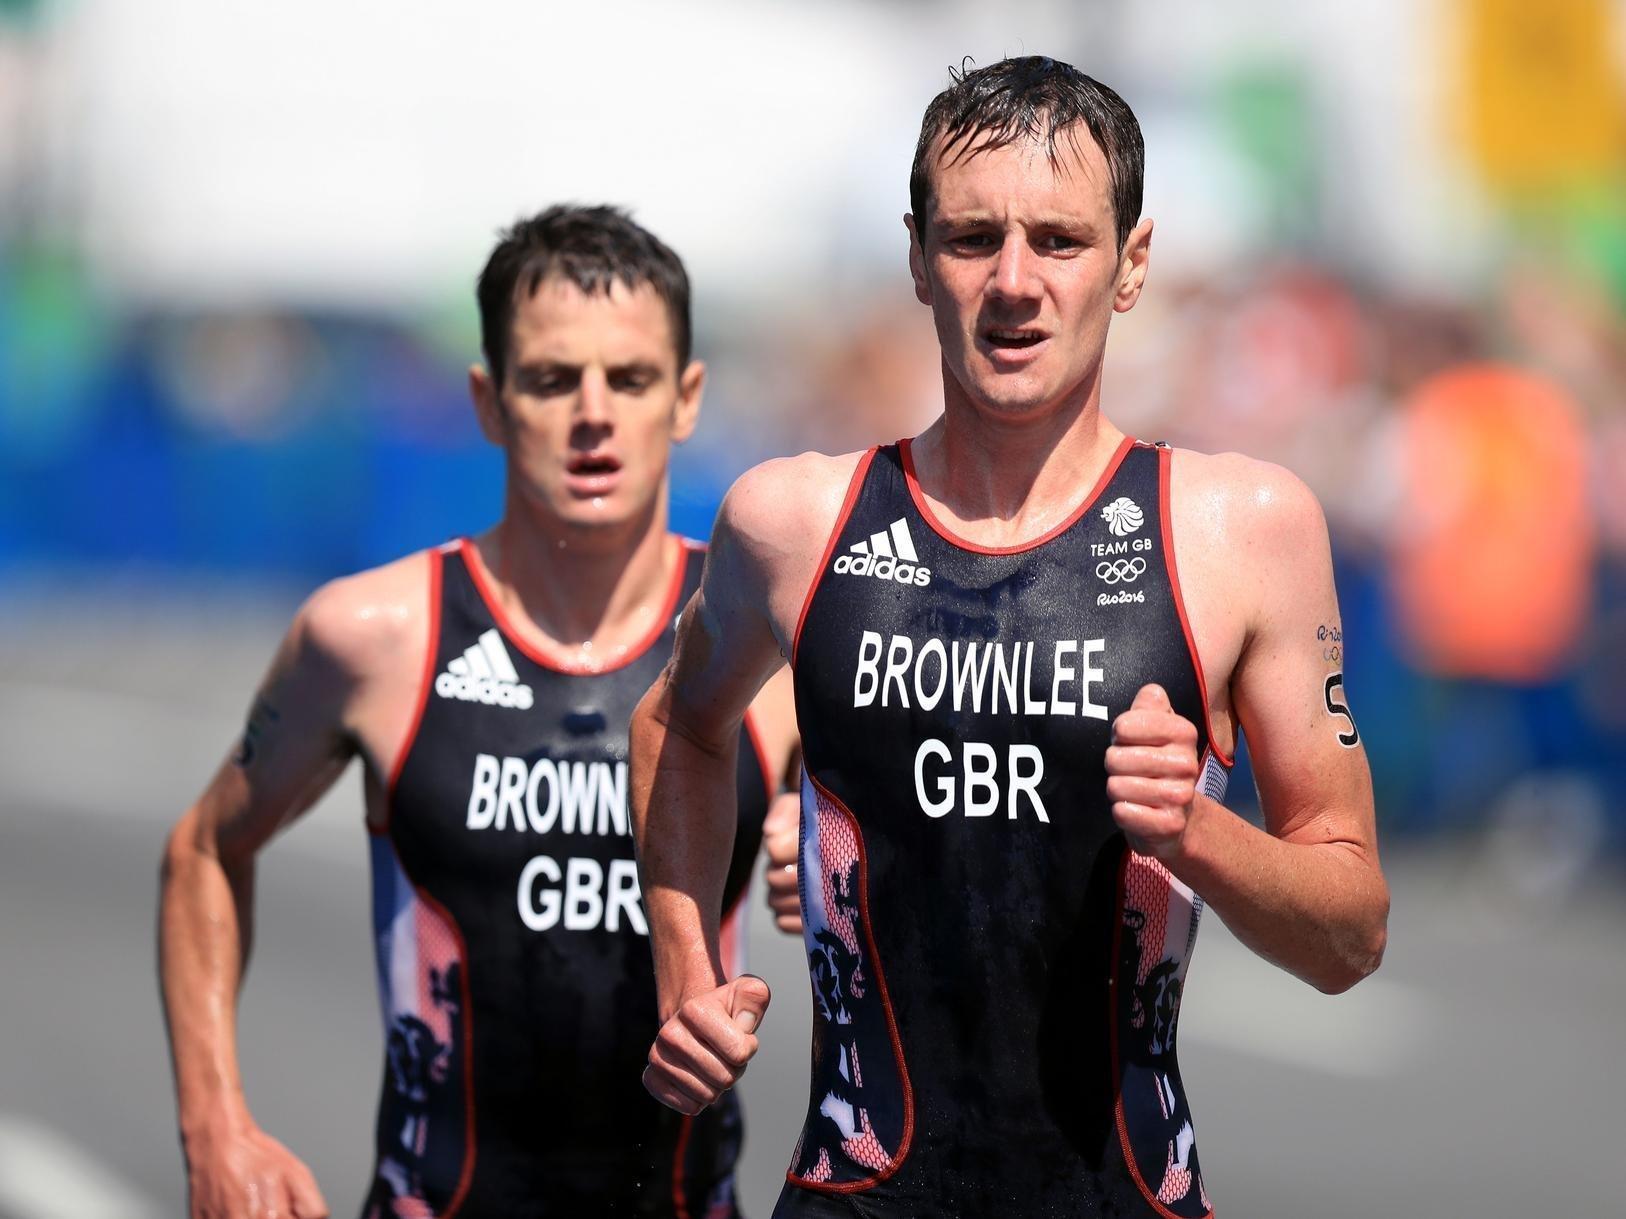 The Brownlee brothers competing at the Rio 2016 Olympic Games